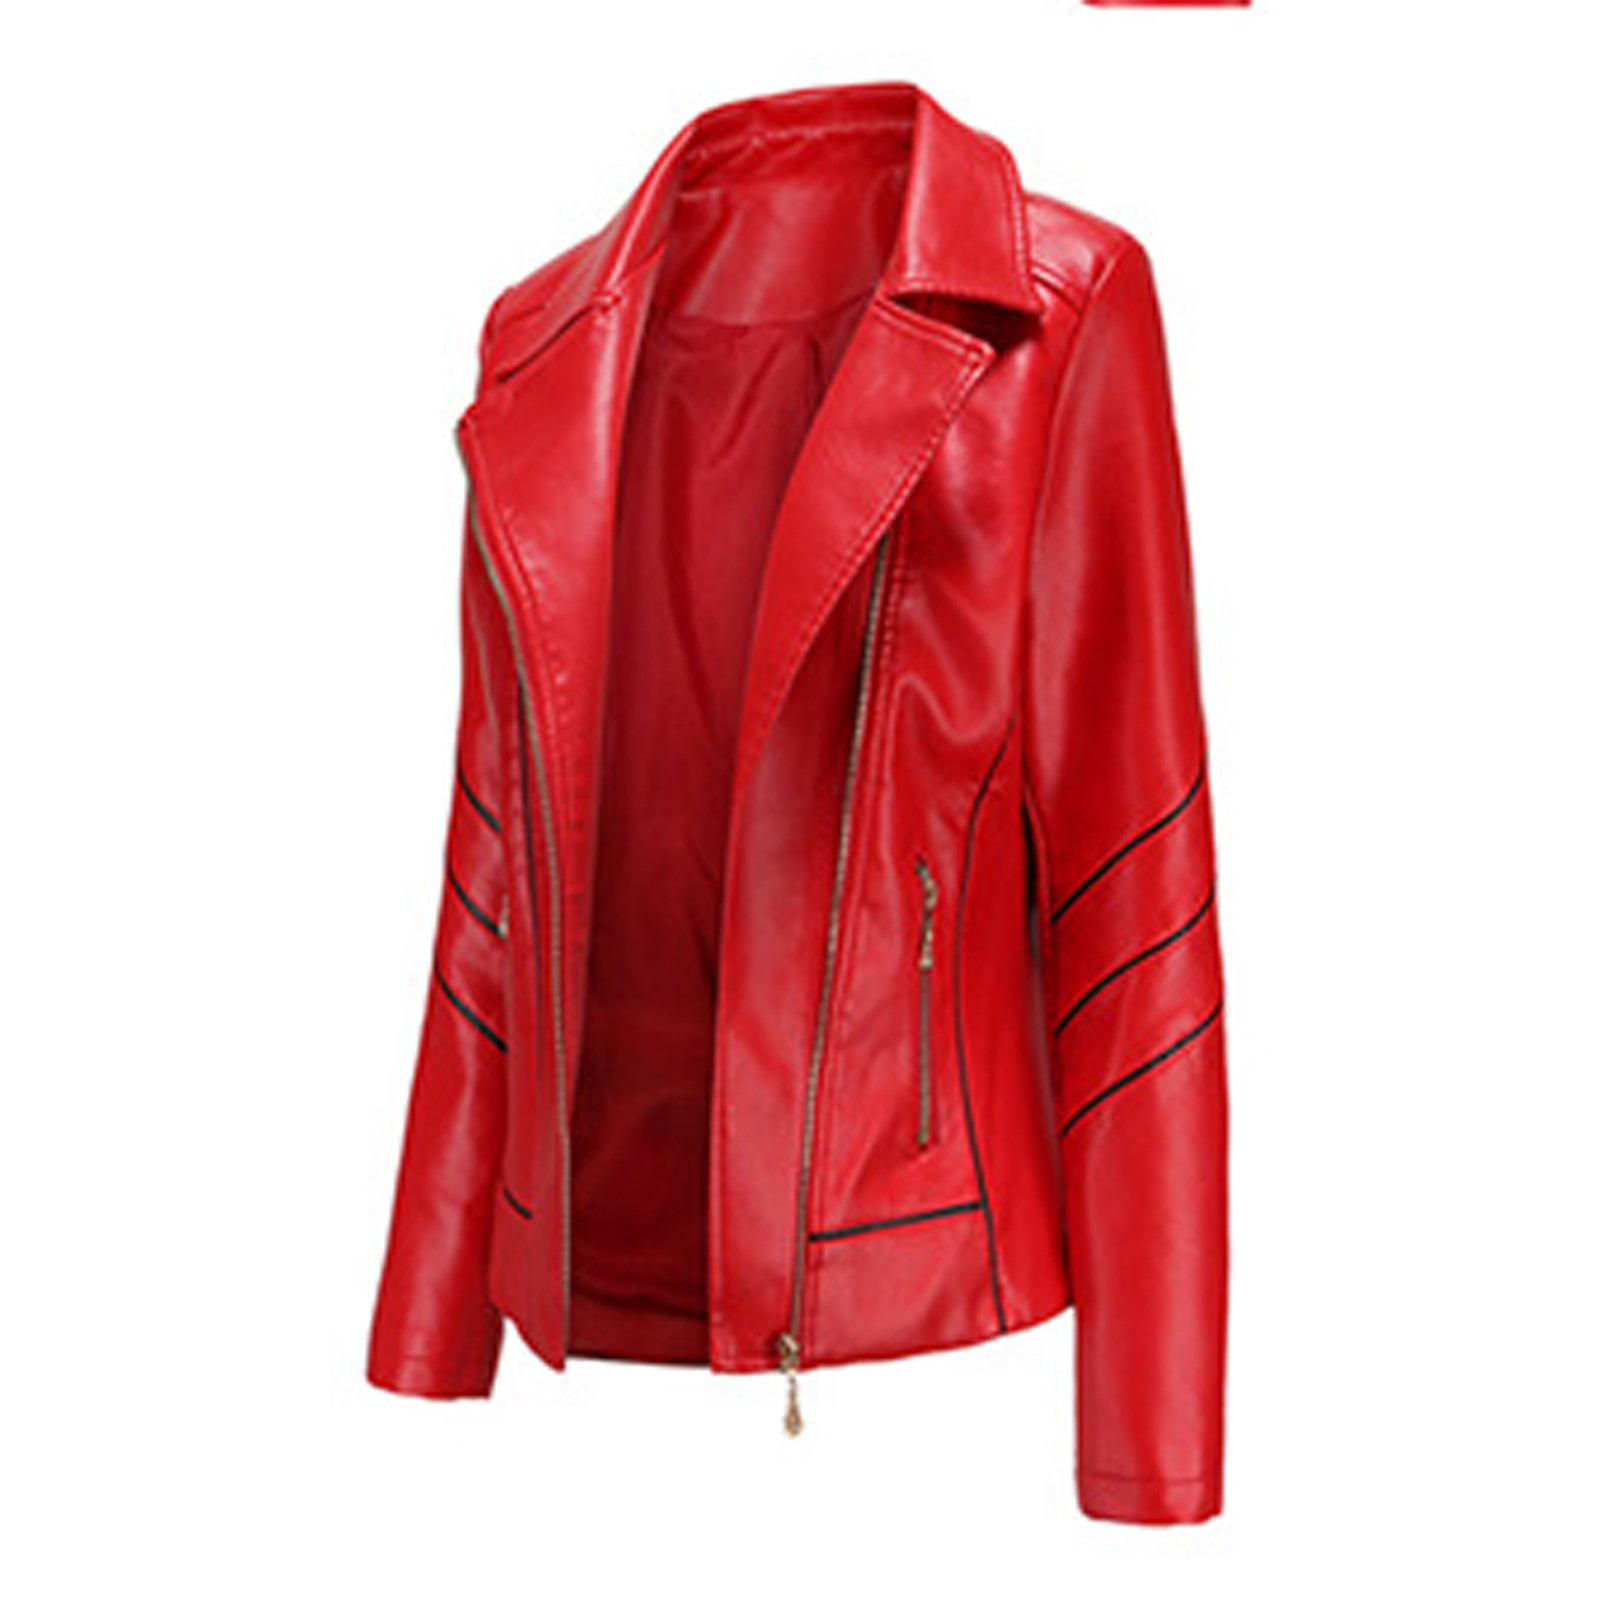 Juebong Womens Lapel Leather Jacket Coat Warm Moto Biker Jacket Outwear Slim Leather Solid Stand Collar Zip Motorcycle Suit Coat Jacket with Pockets, Red, XL - image 4 of 6